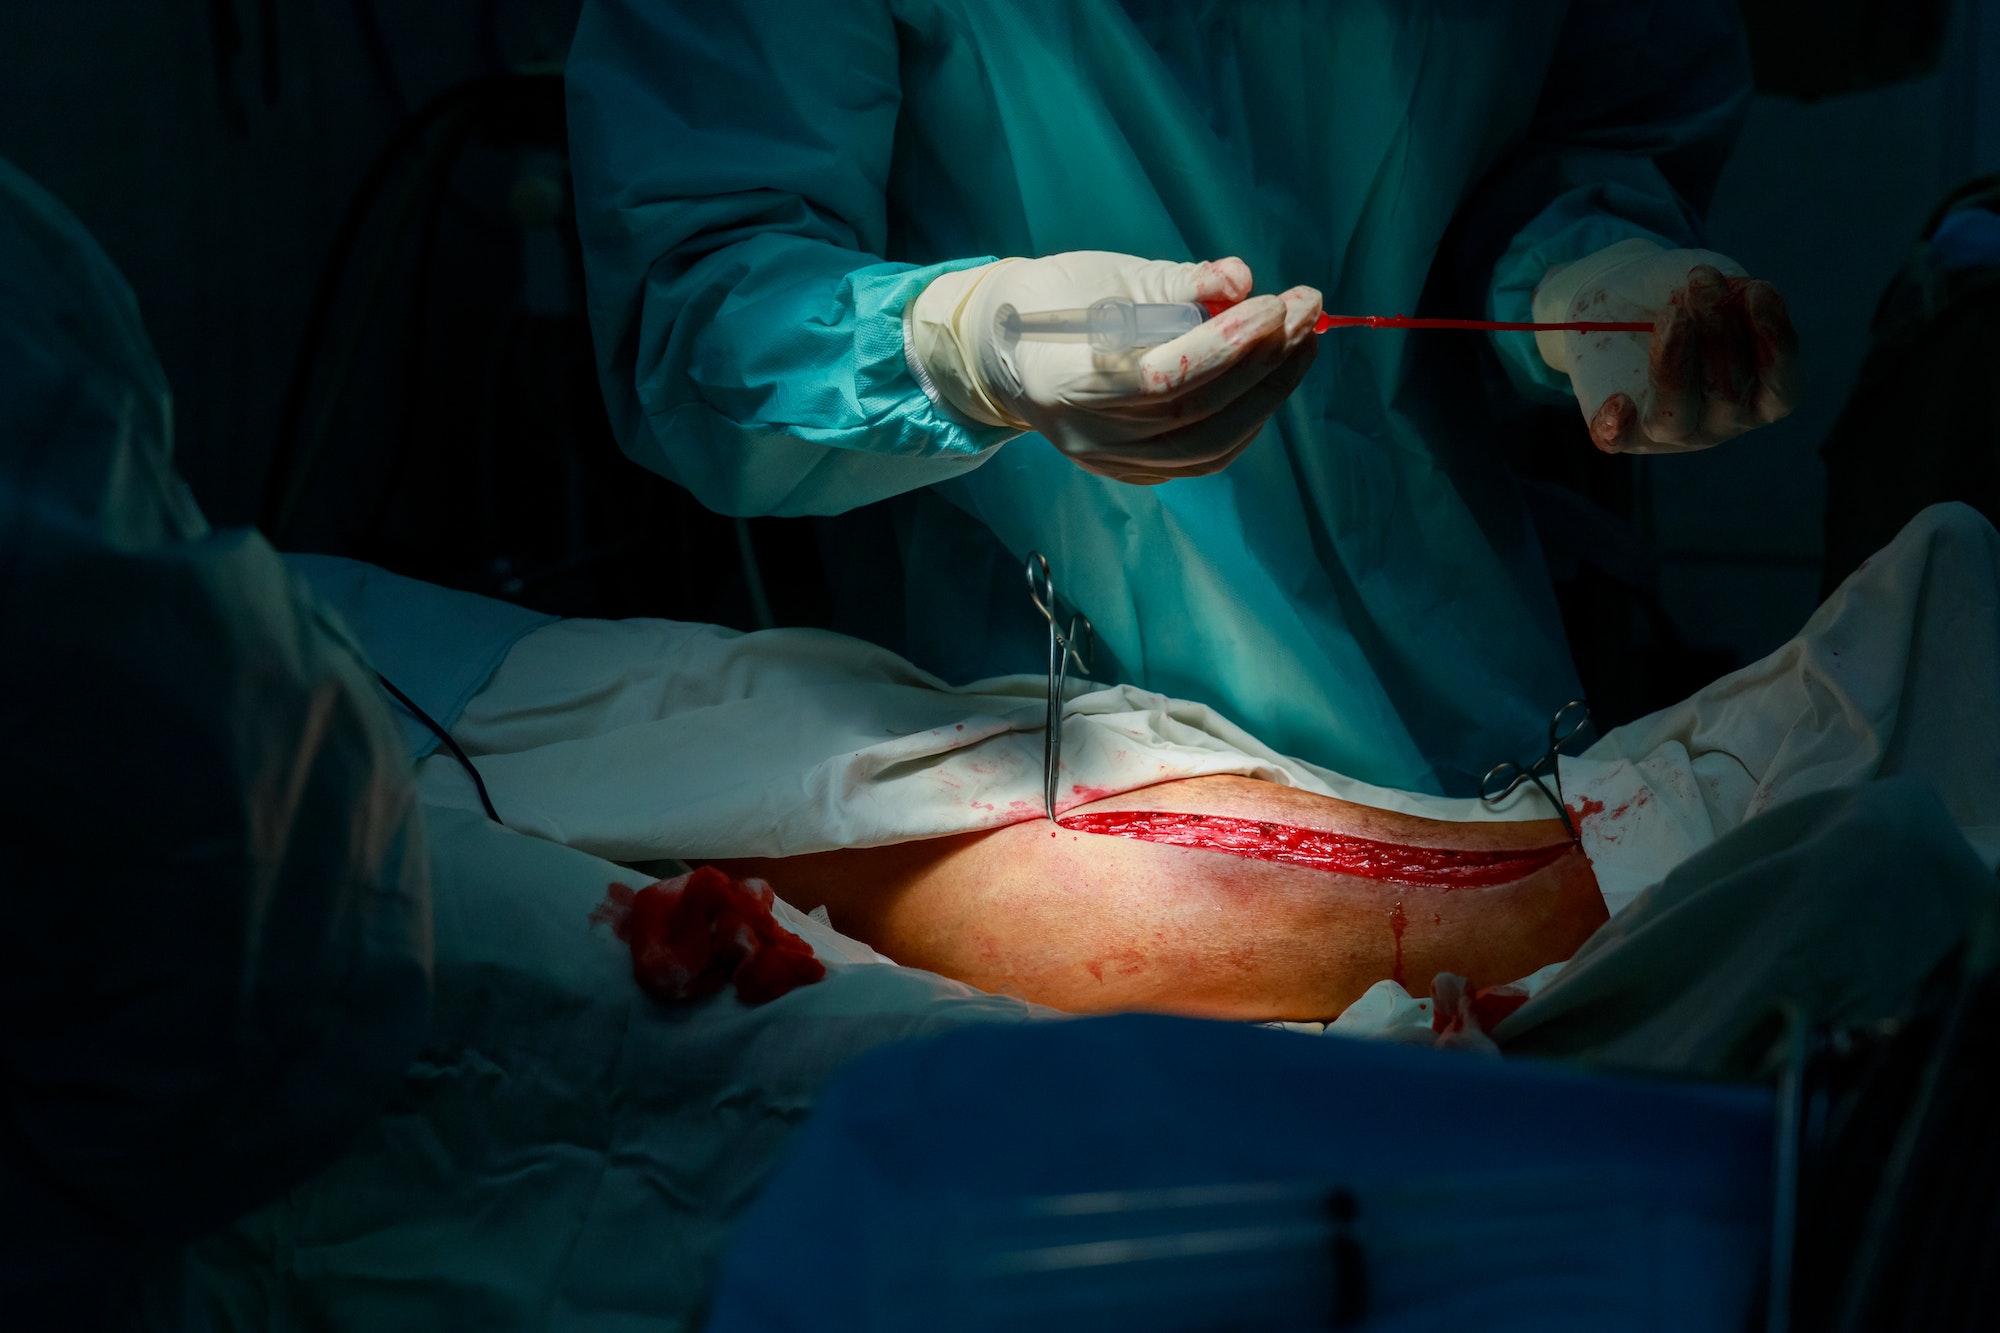 A surgeon pick out a vein leg to heart bypass surgery operation in the operating room